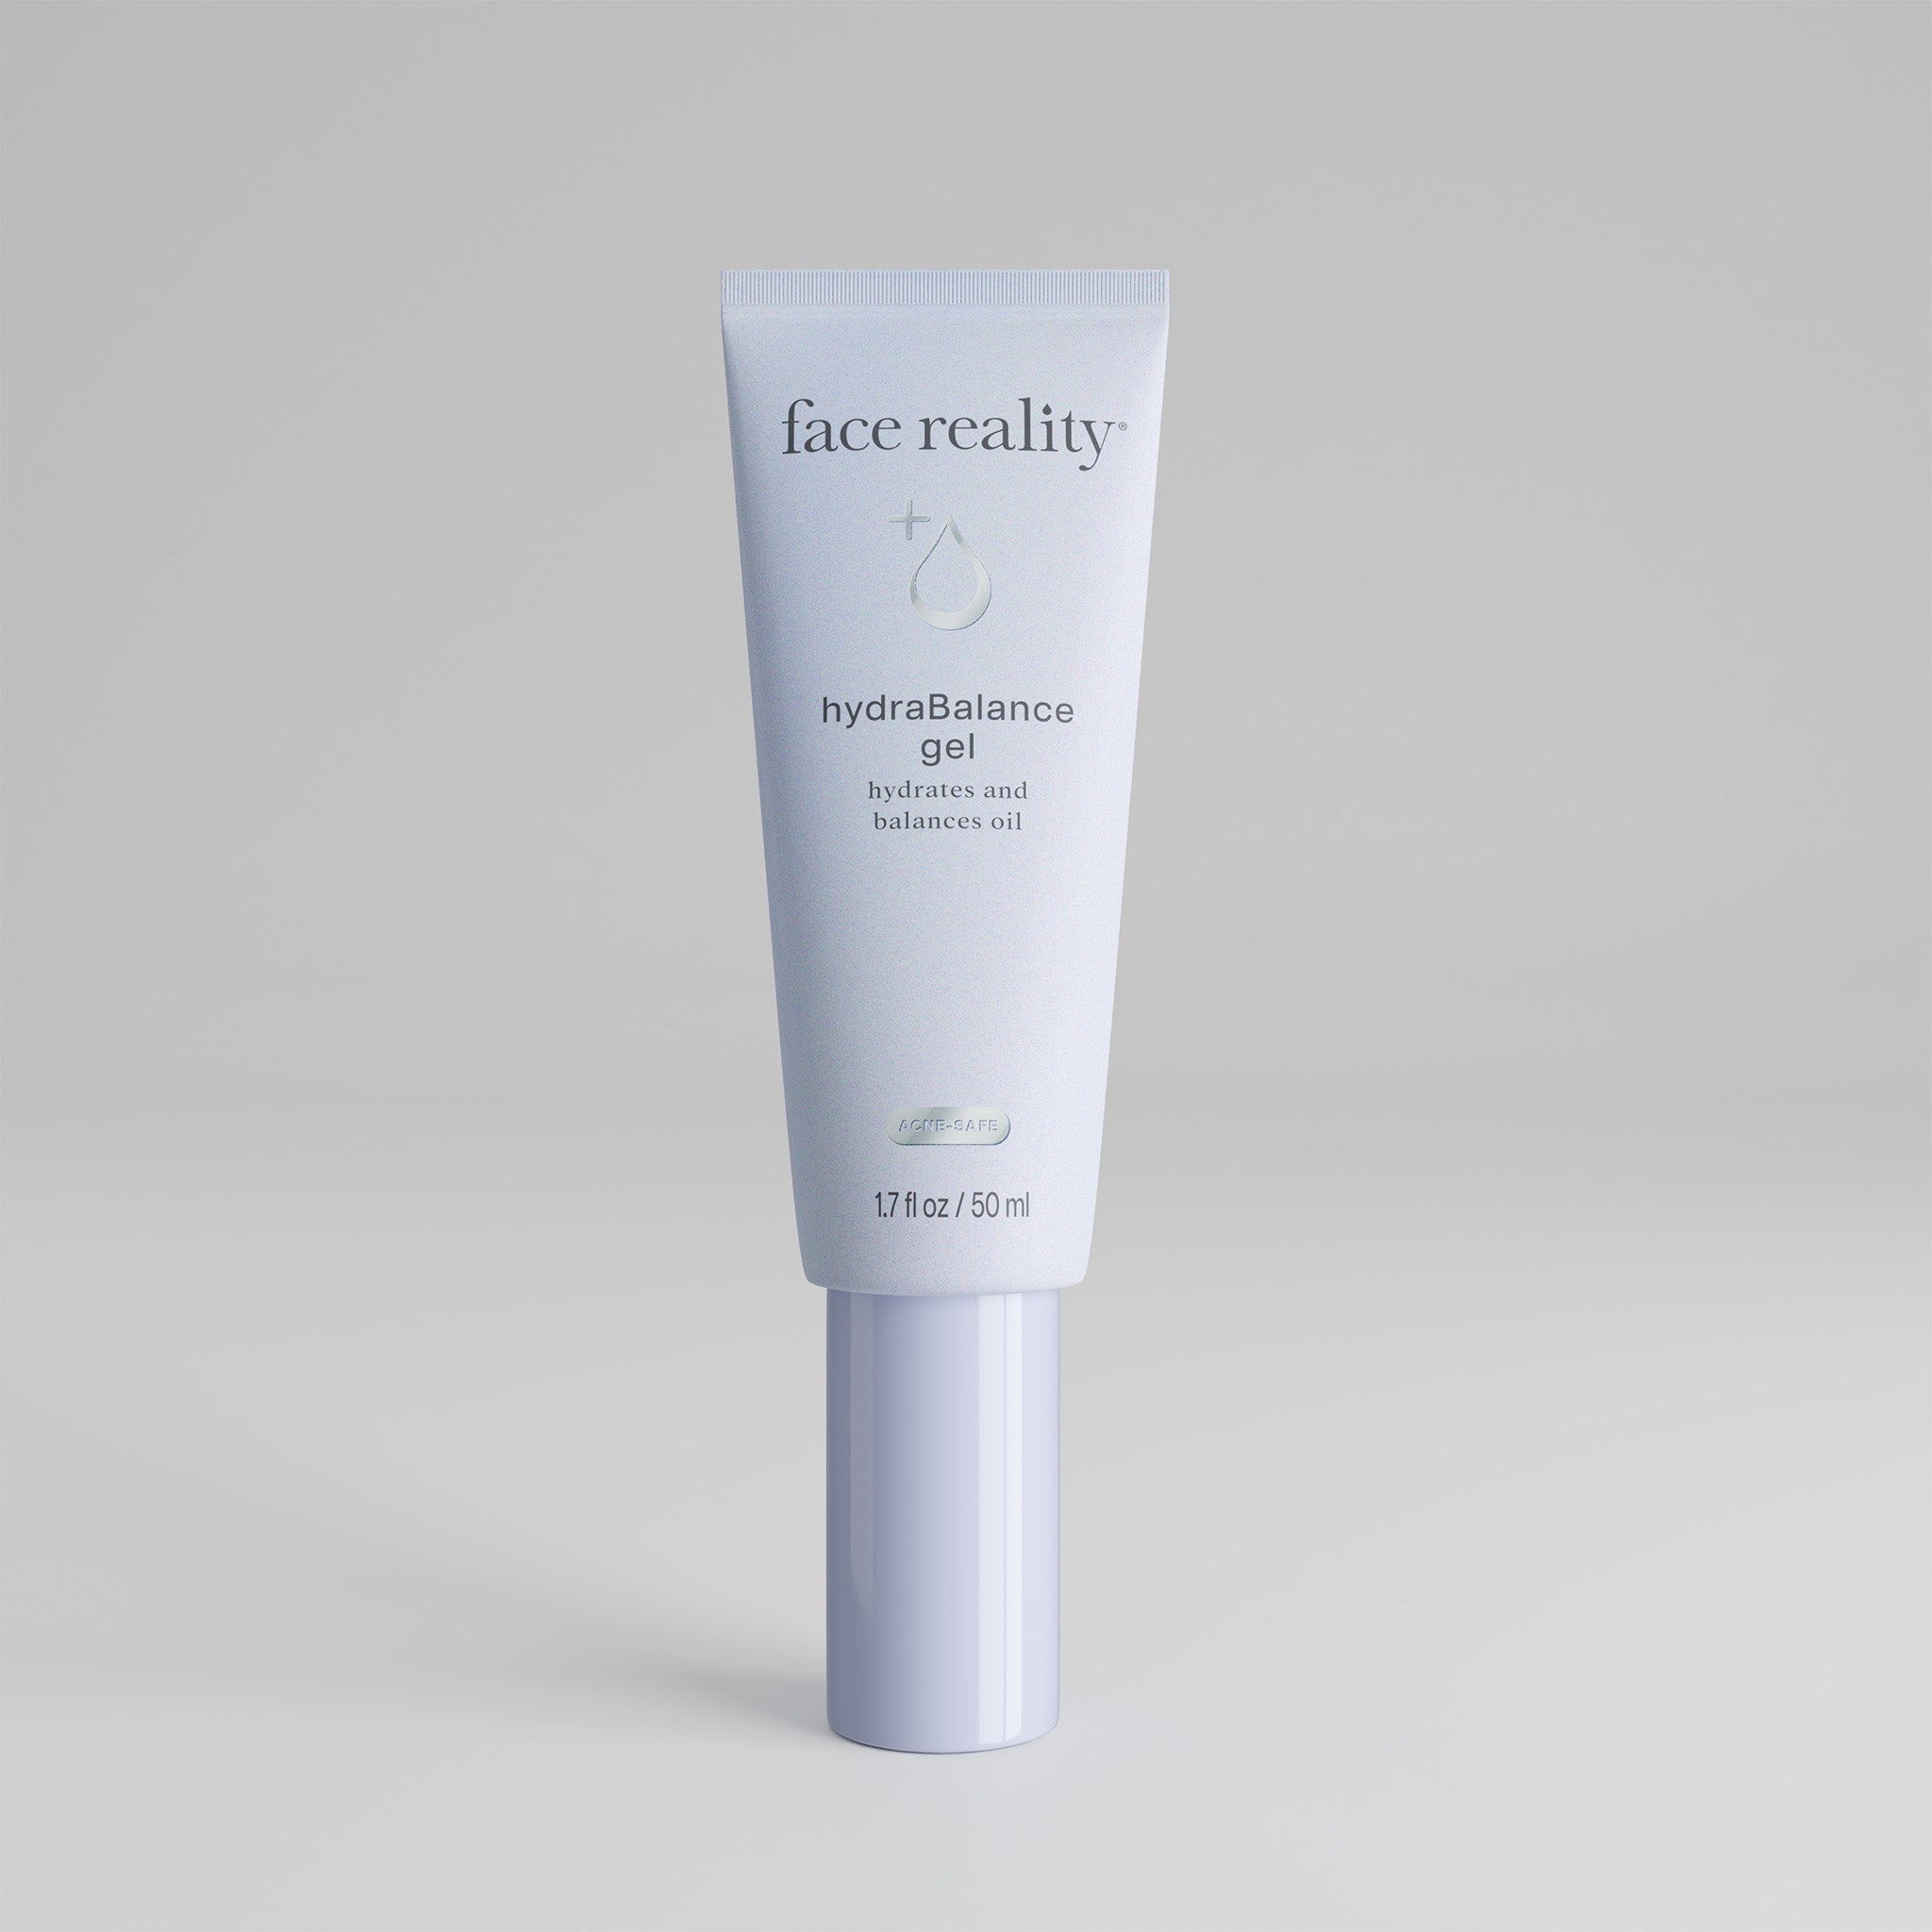 Hydrabalance Hydrating Gel | Face Reality - The Luxe Medspa